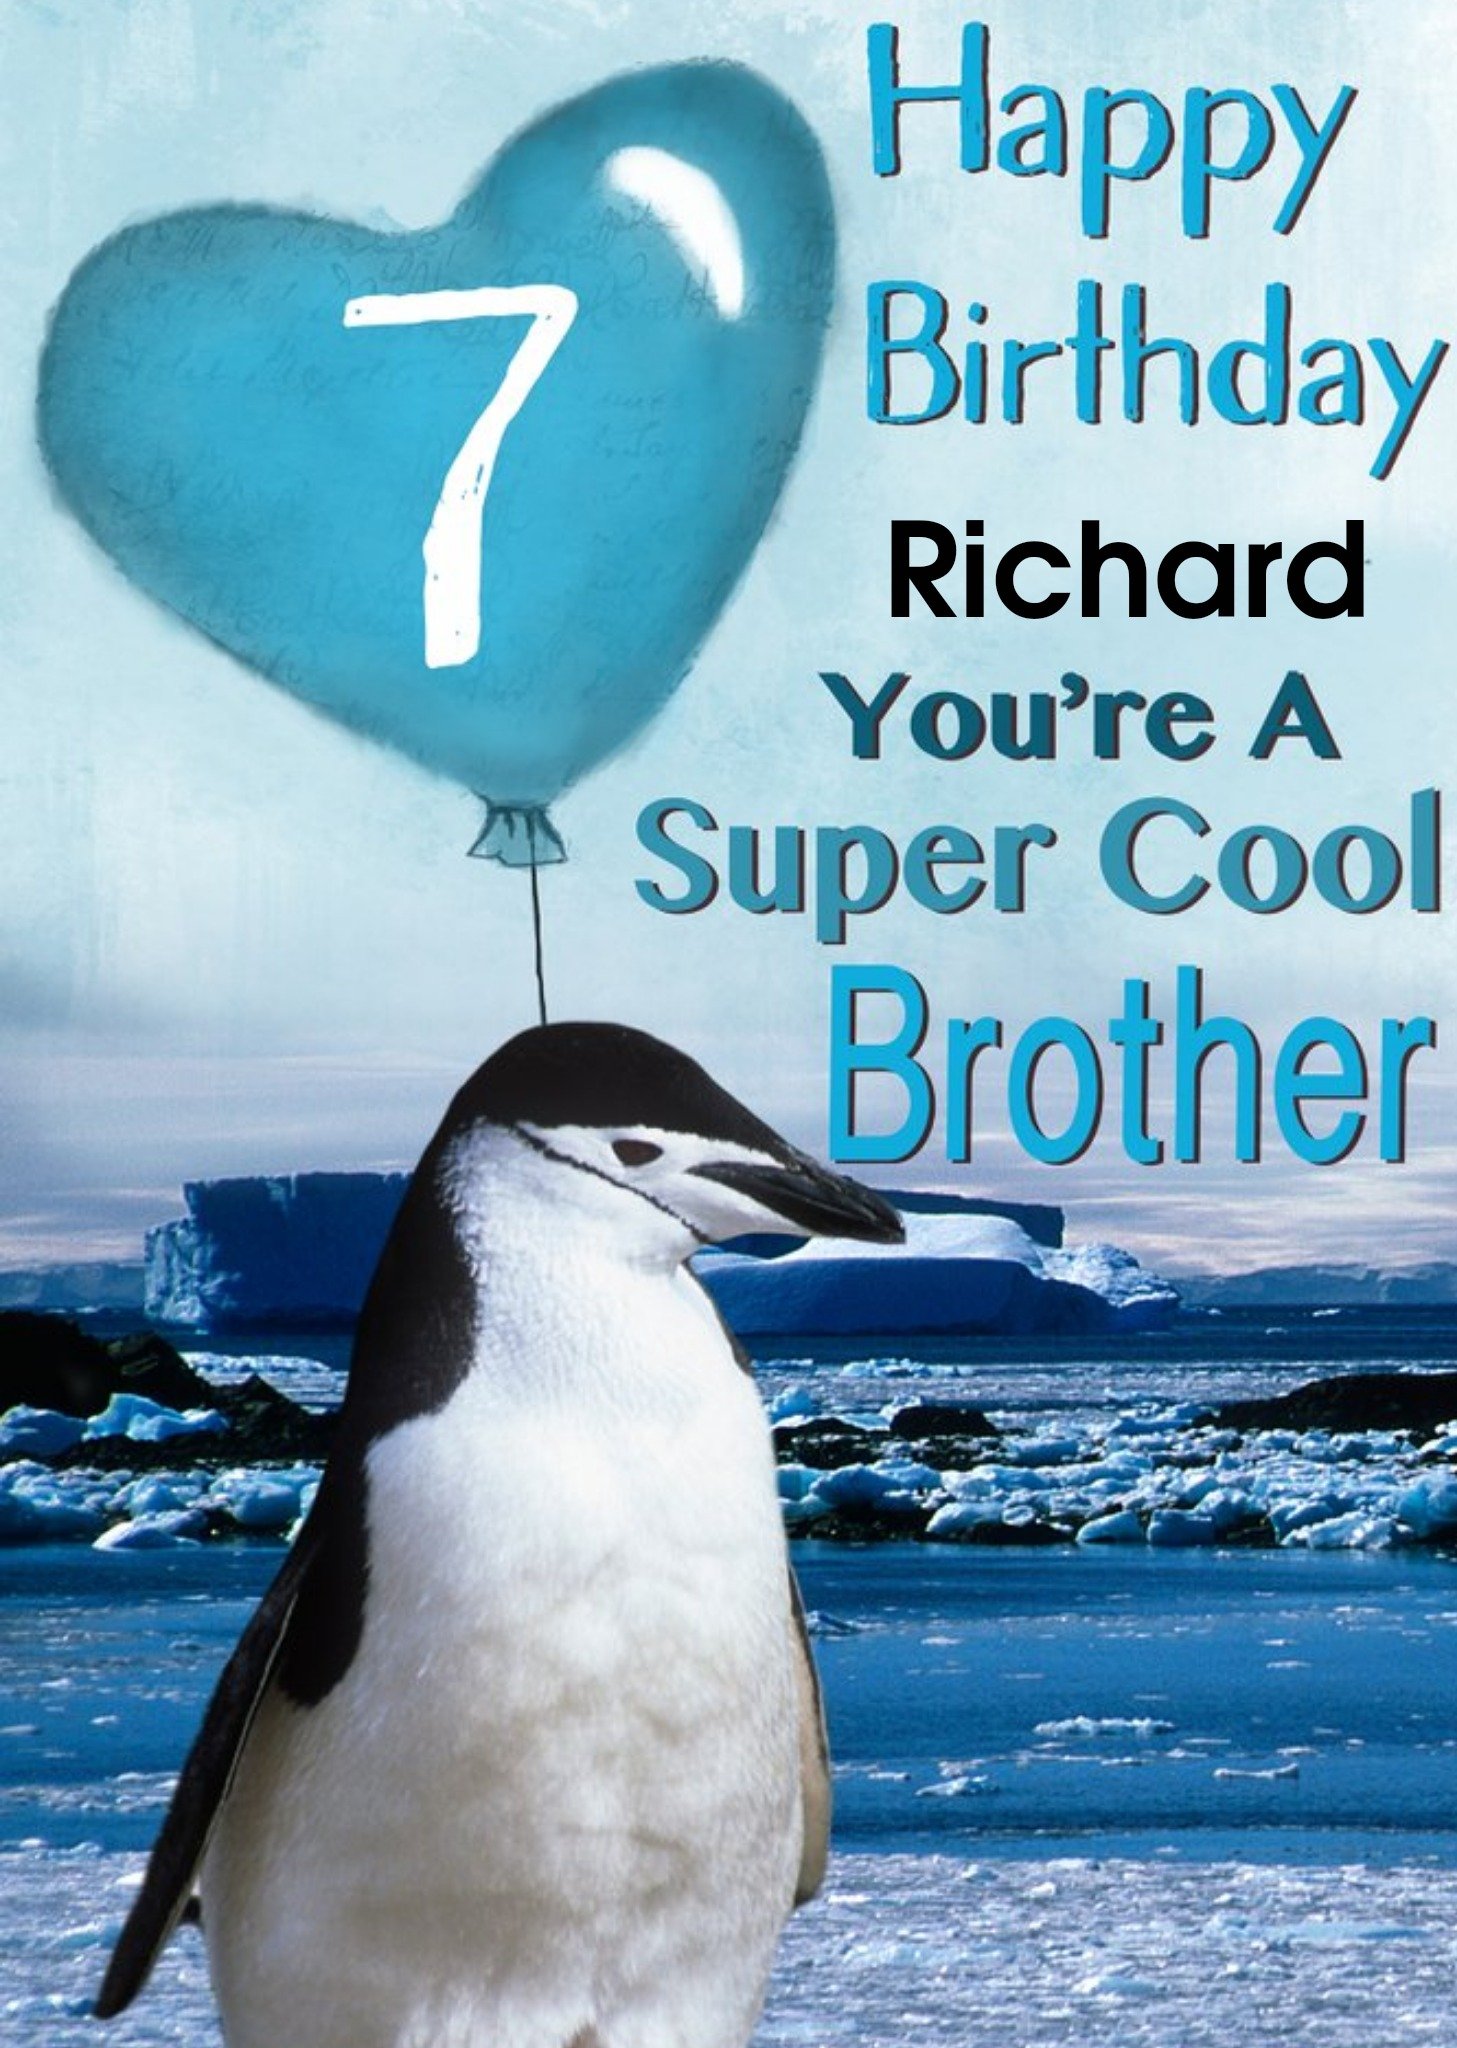 Moonpig Photo Of Penguin With Birthday Balloon Brother 7th Birthday Card, Large